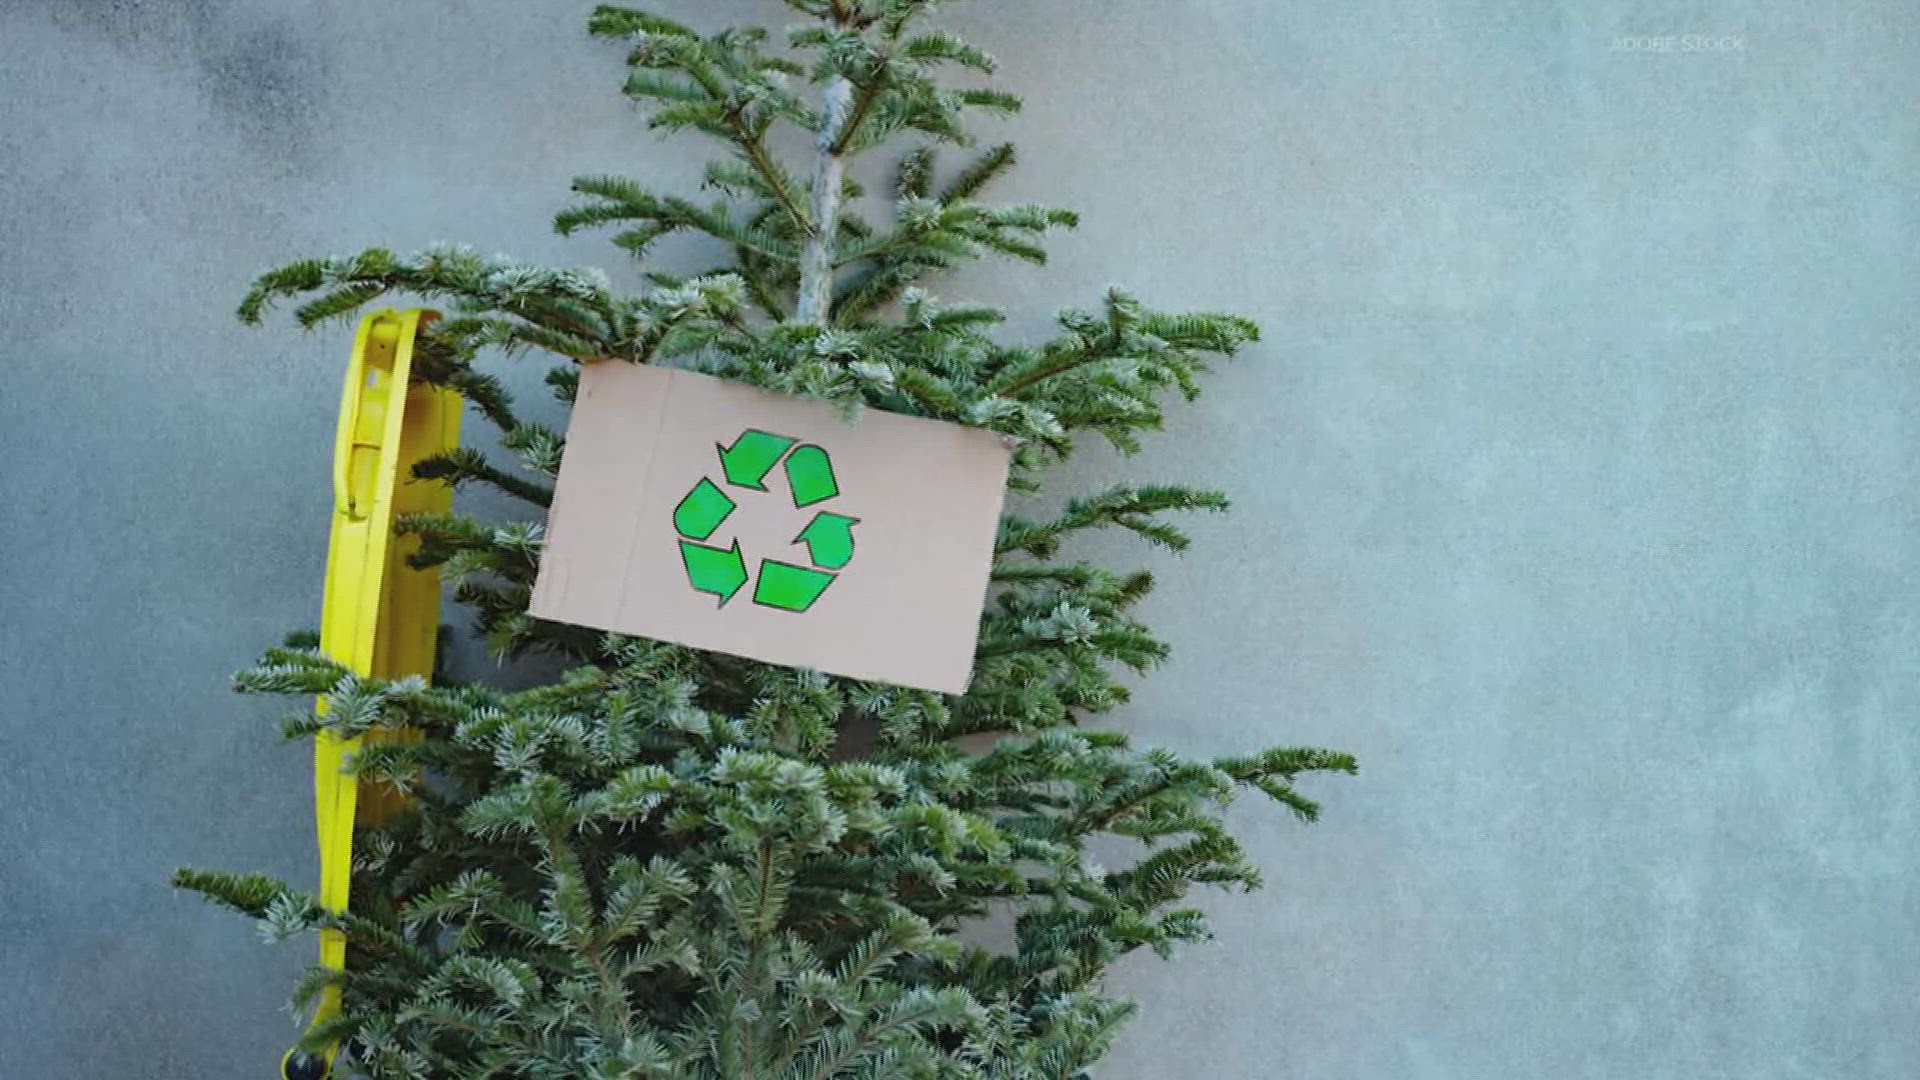 If you opted for a live tree this year, the City of Beaumont is providing locations for you to recycle it for free.